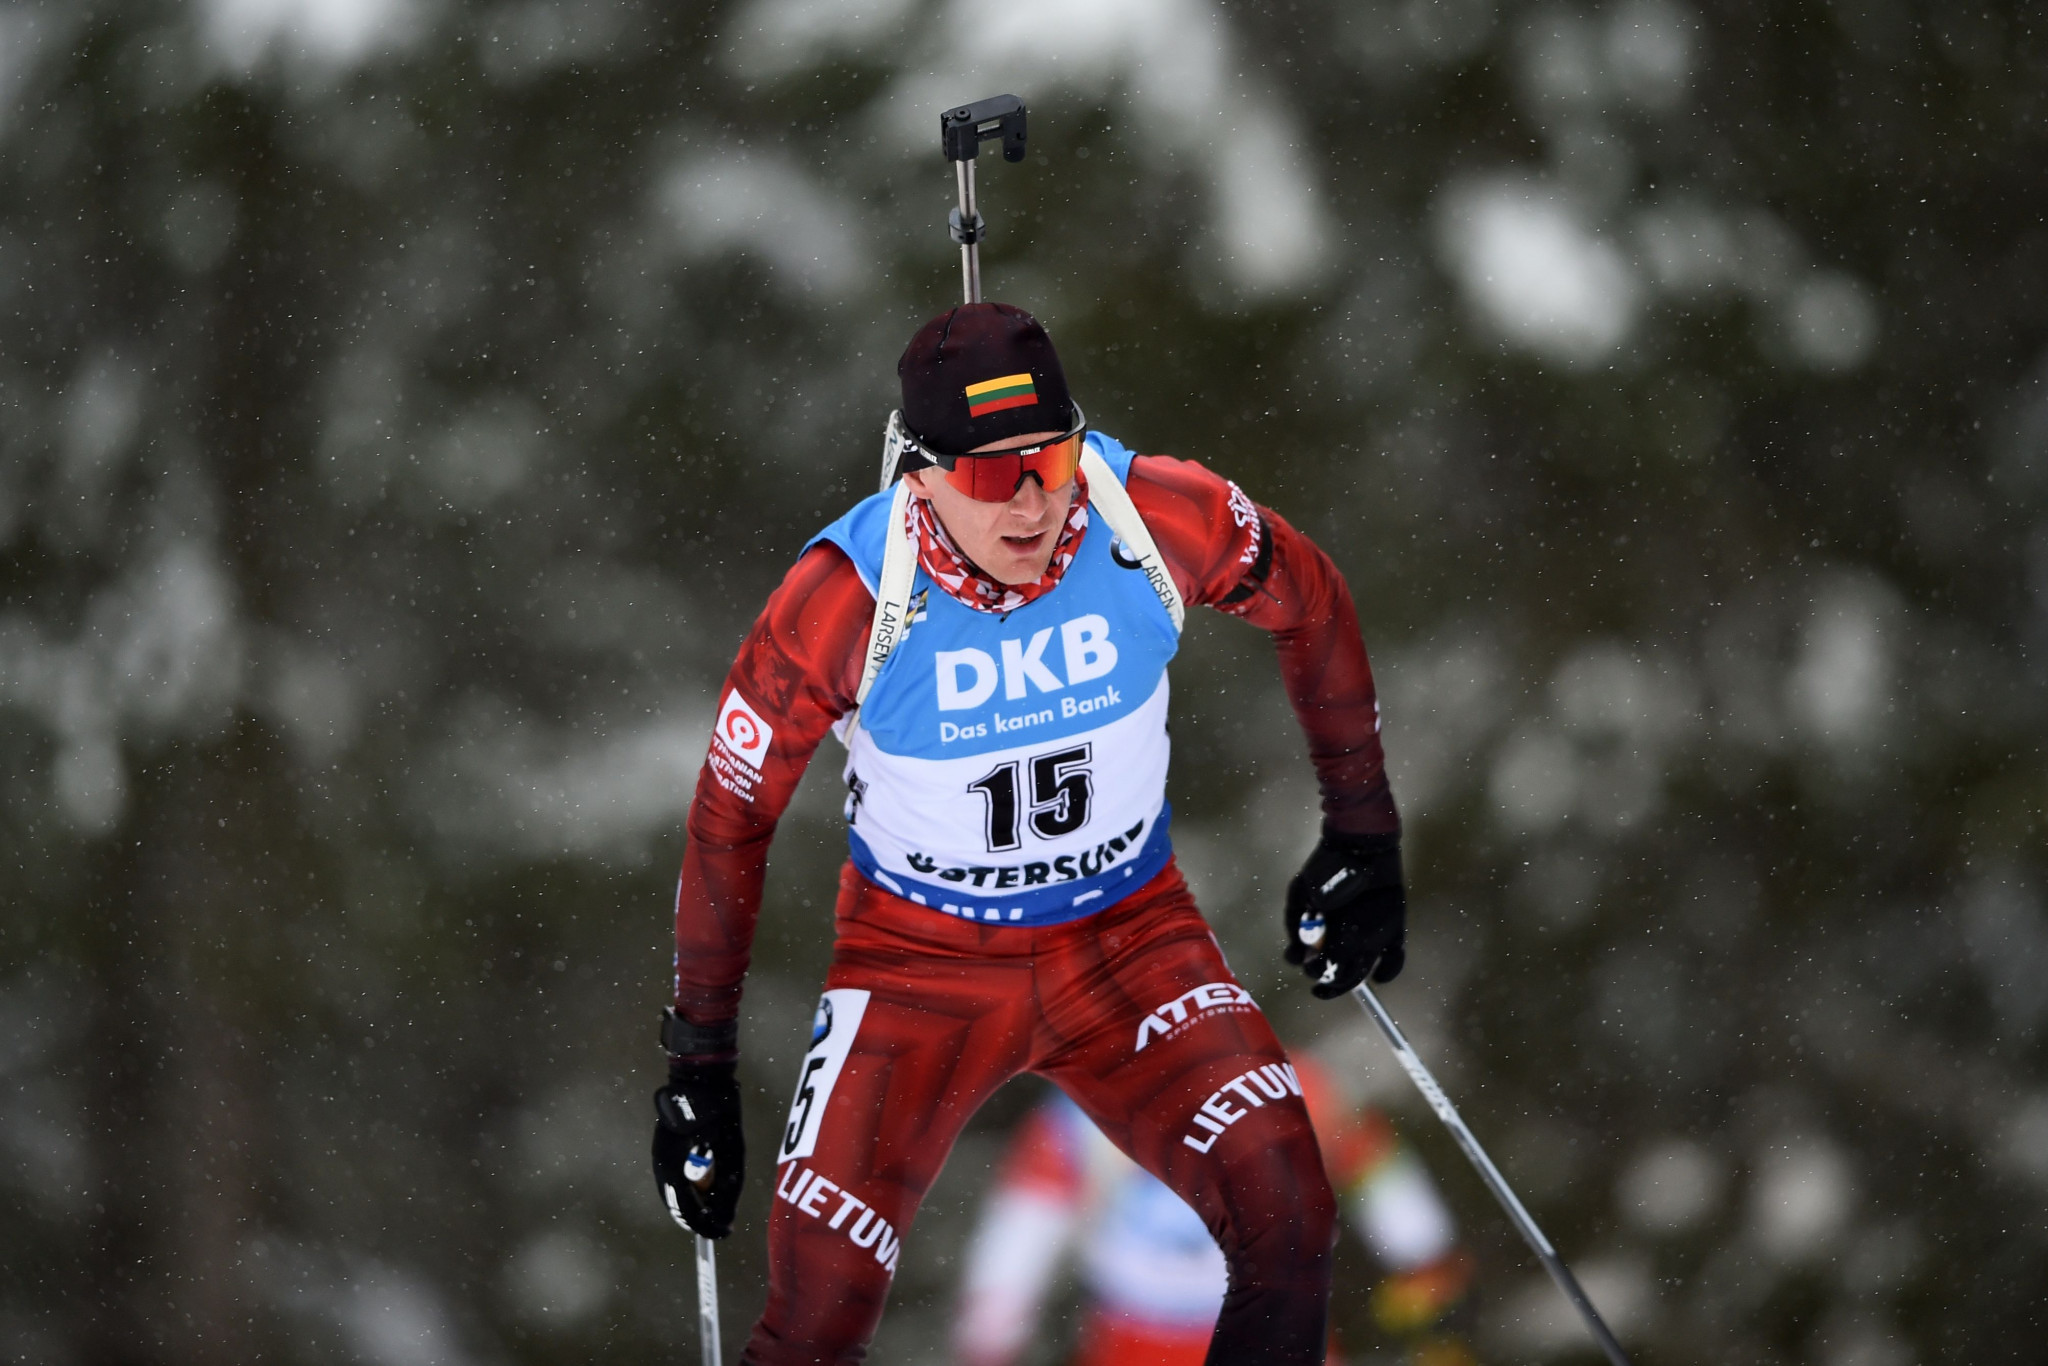 Biathlete Tomas Kaukėnas said a fake letter had been distributed using his name ©Getty Images